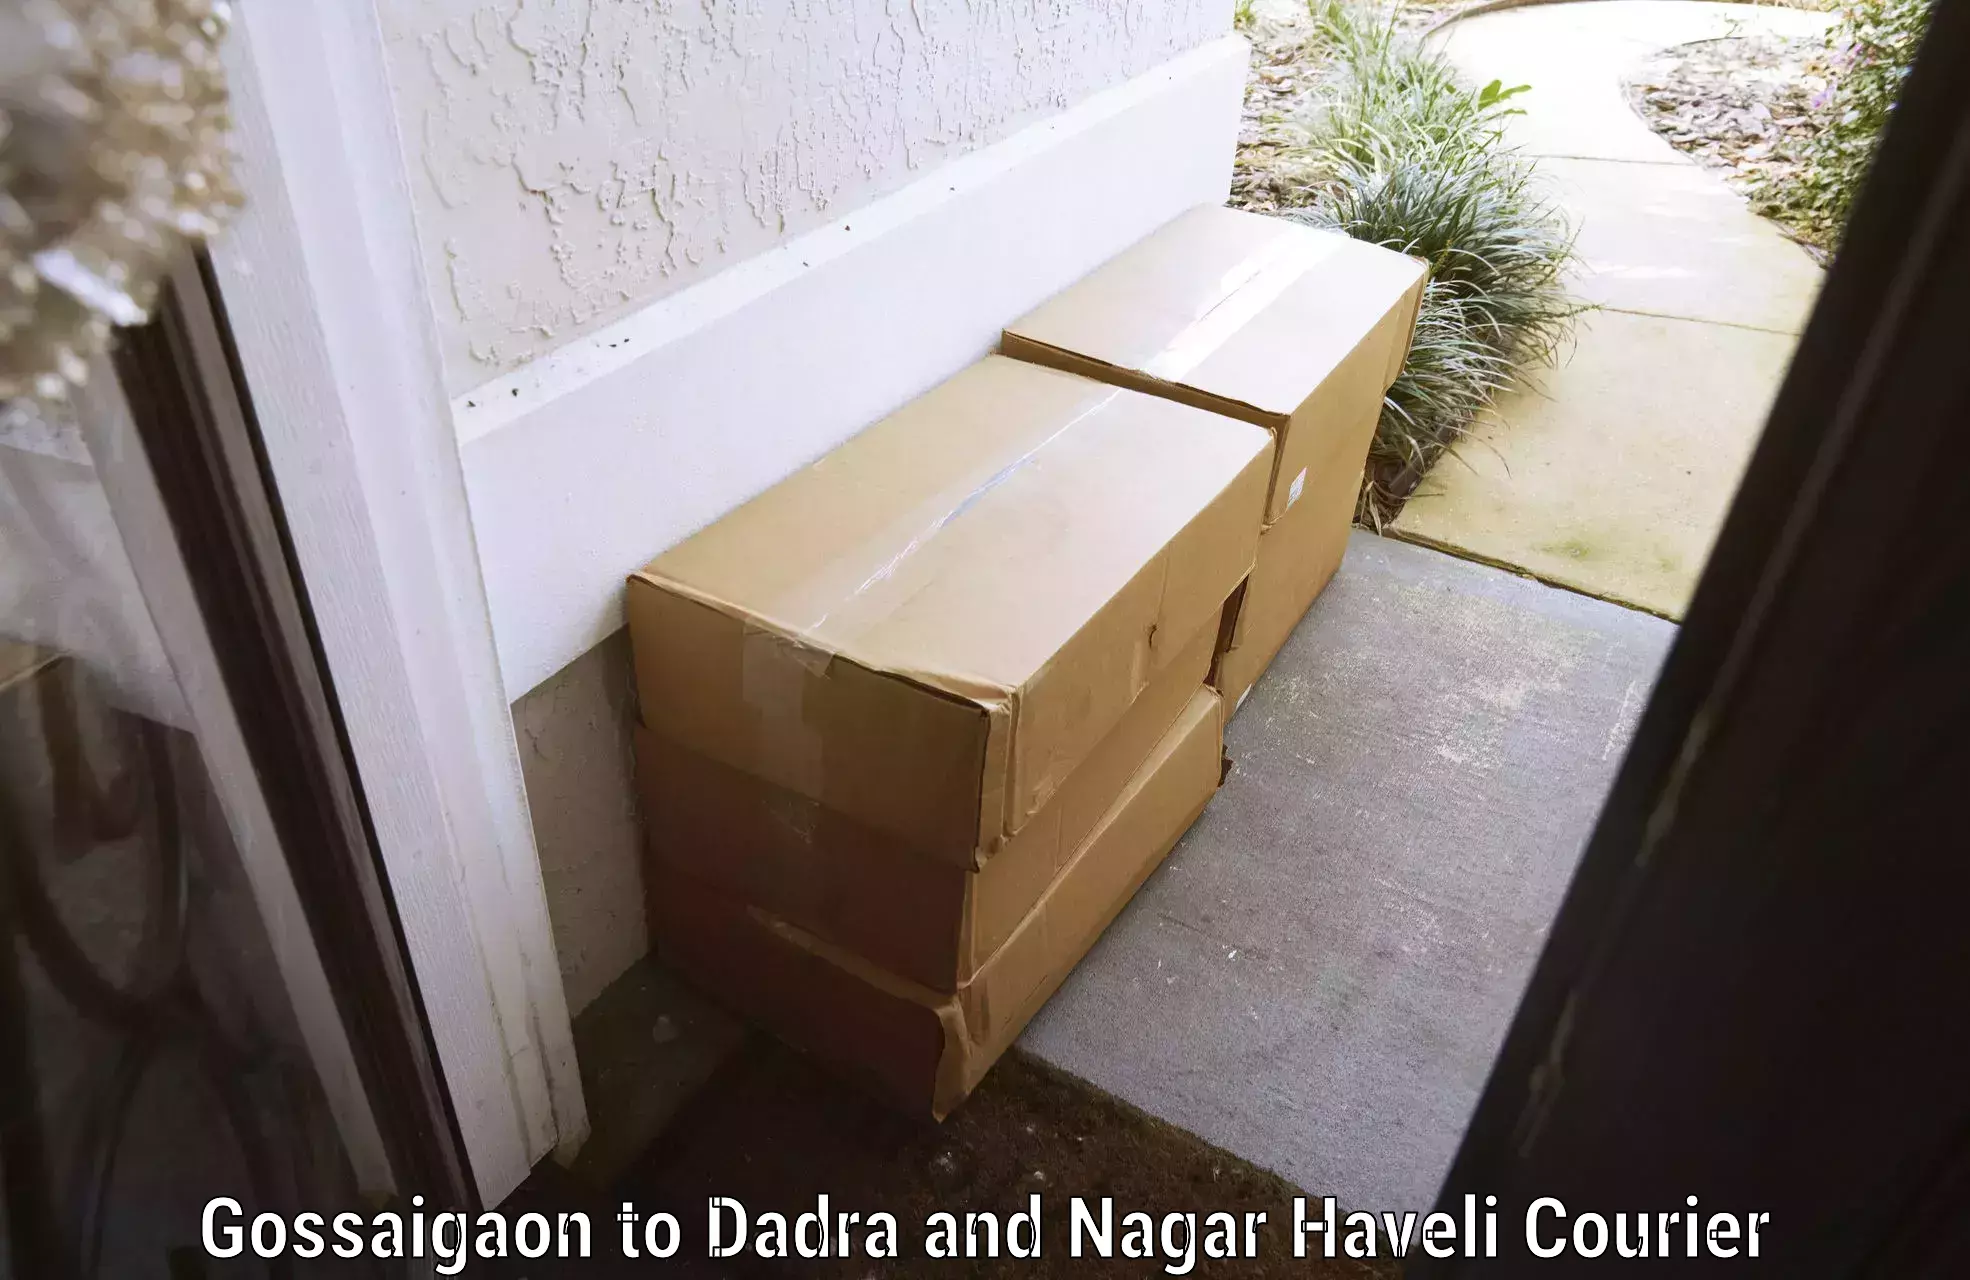 Professional baggage transport in Gossaigaon to Dadra and Nagar Haveli